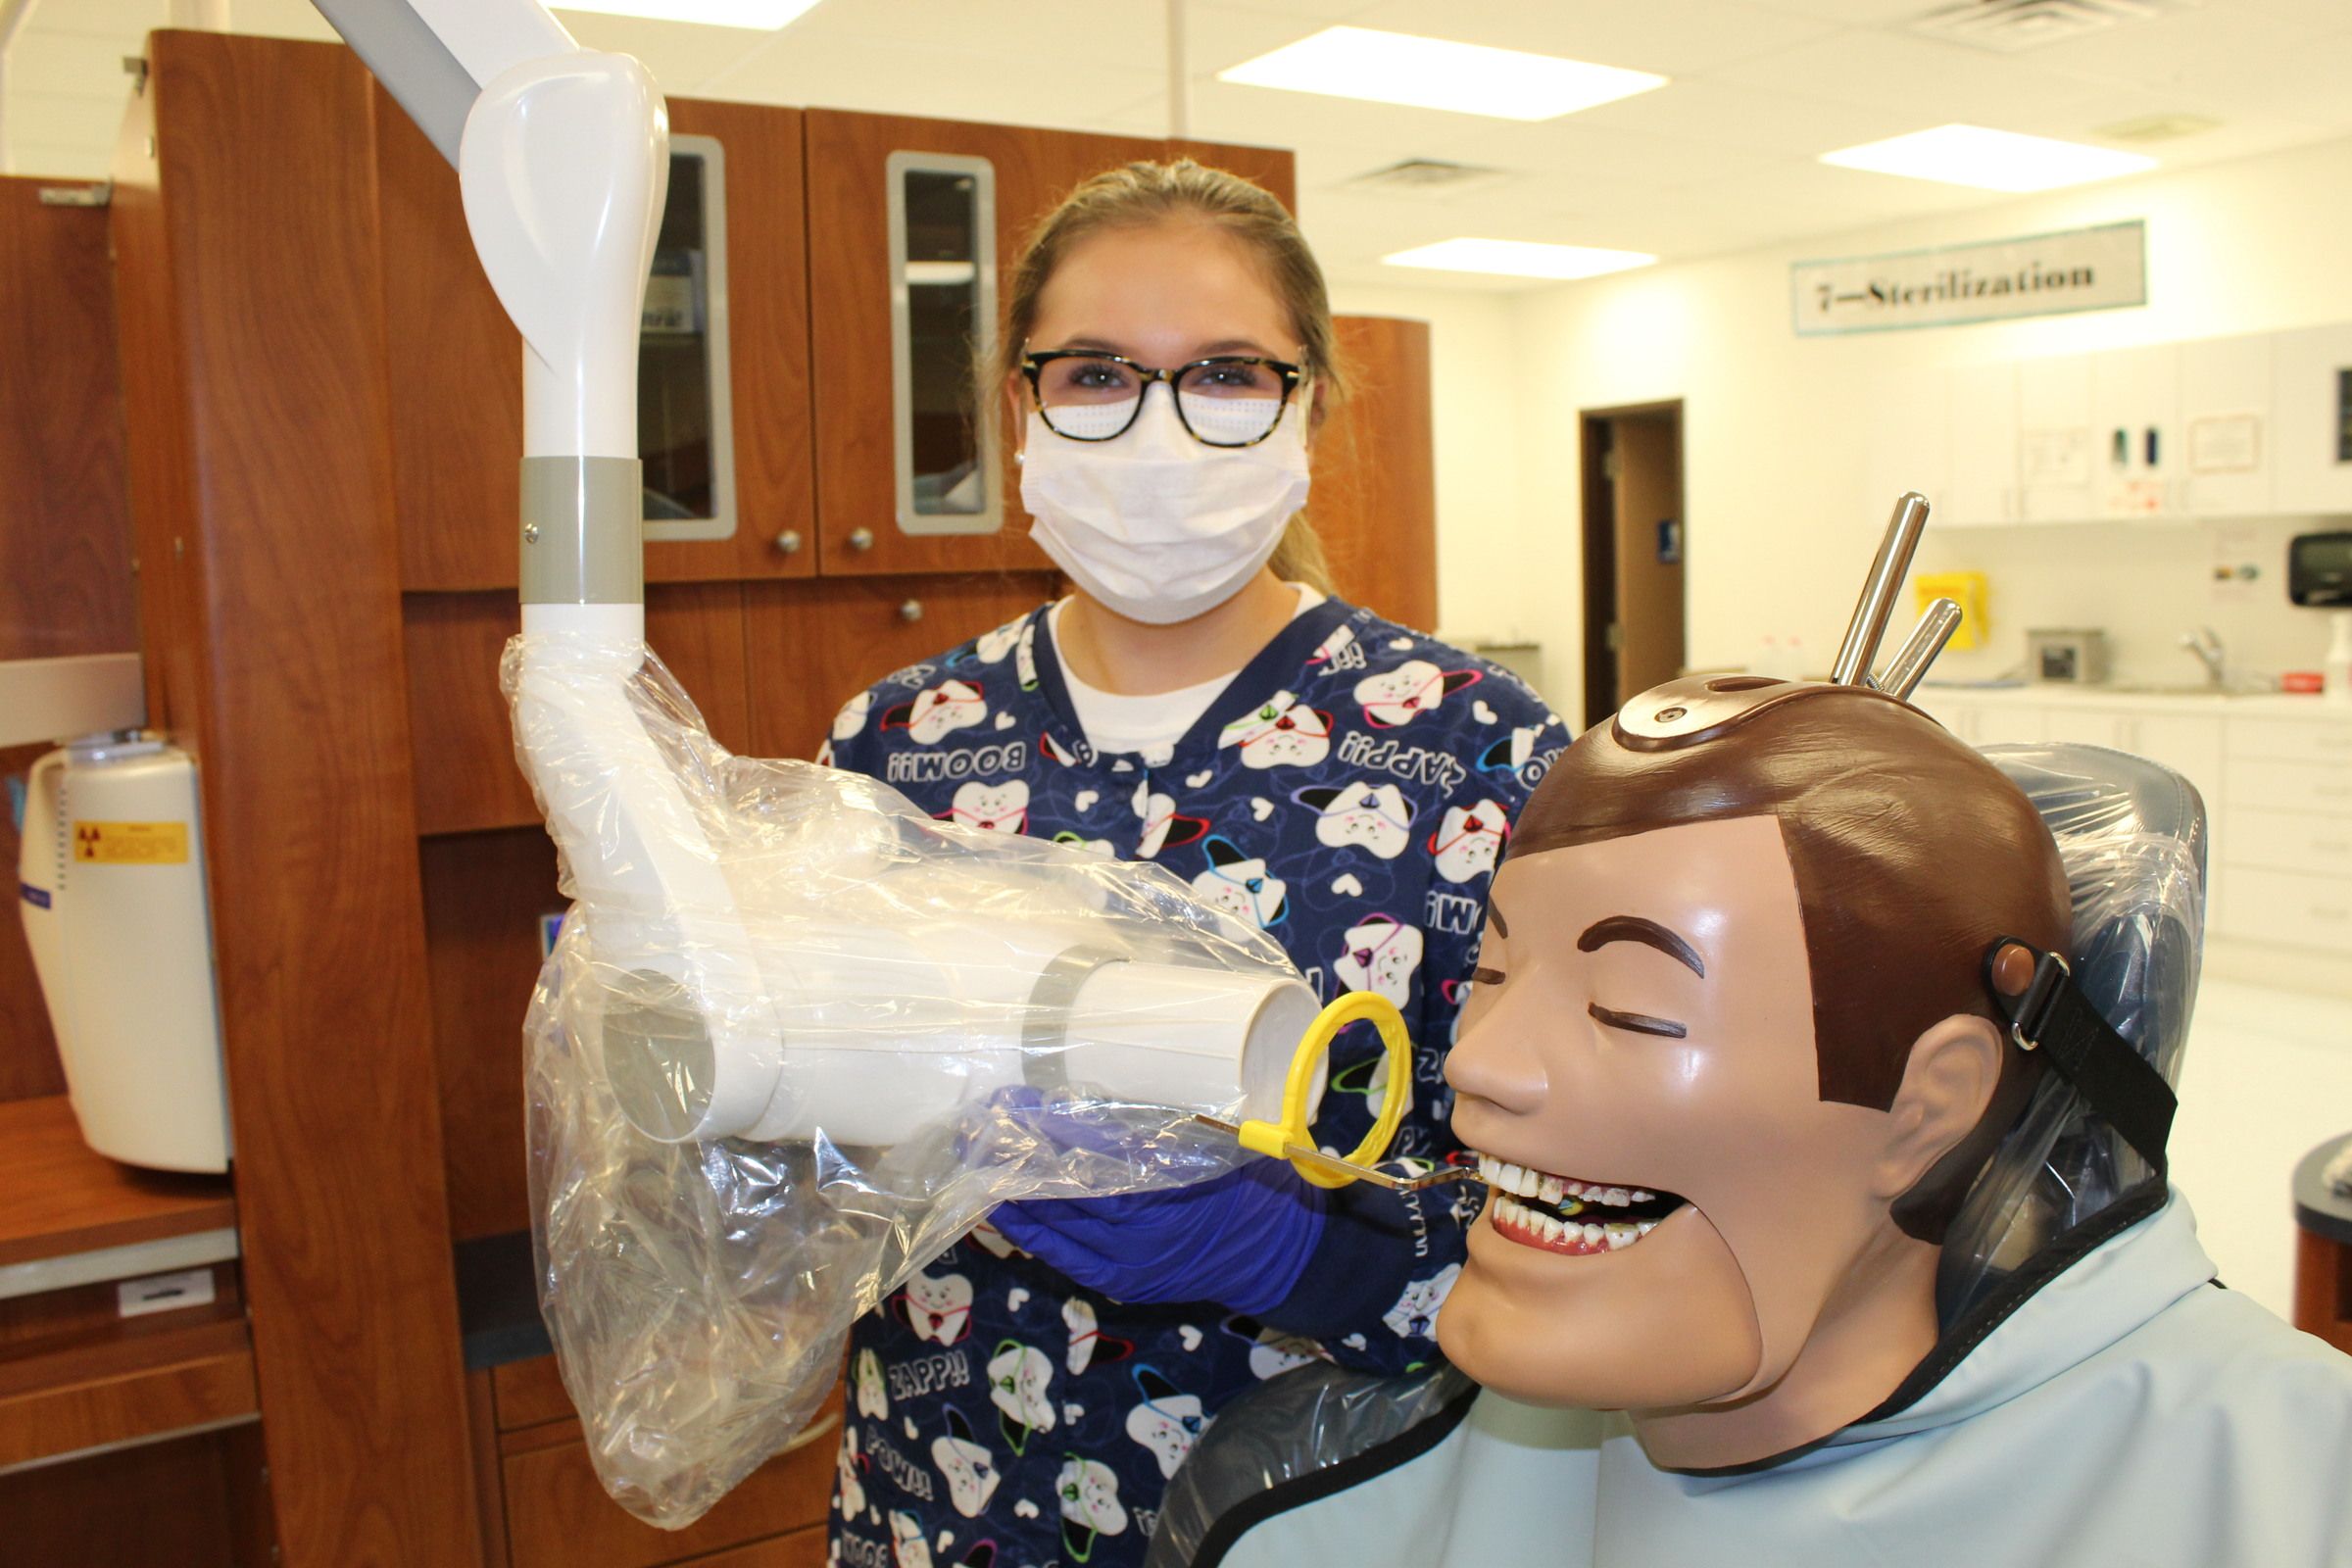 Dental Assisting student taking an x-ray